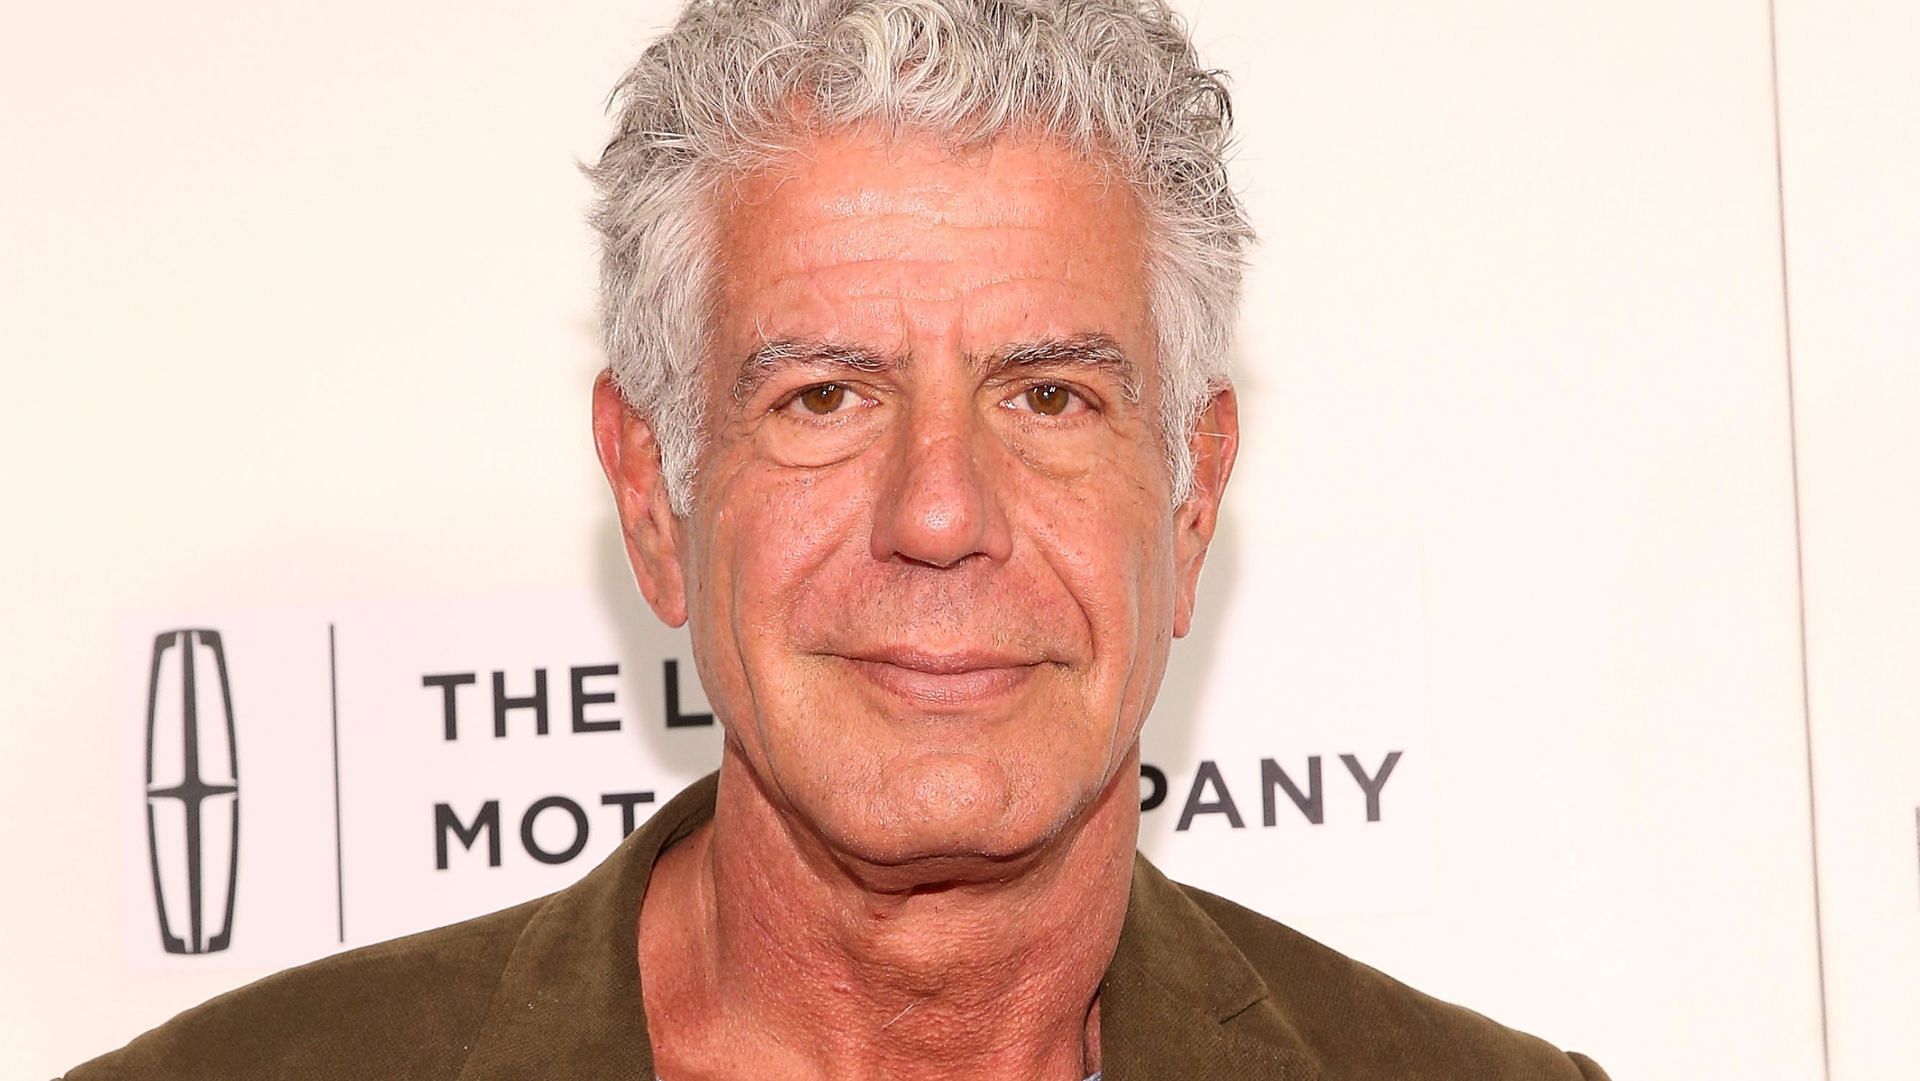 Anthony Bourdain passed away on June 8, 2018. (Image via Robin Marchant/Getty)